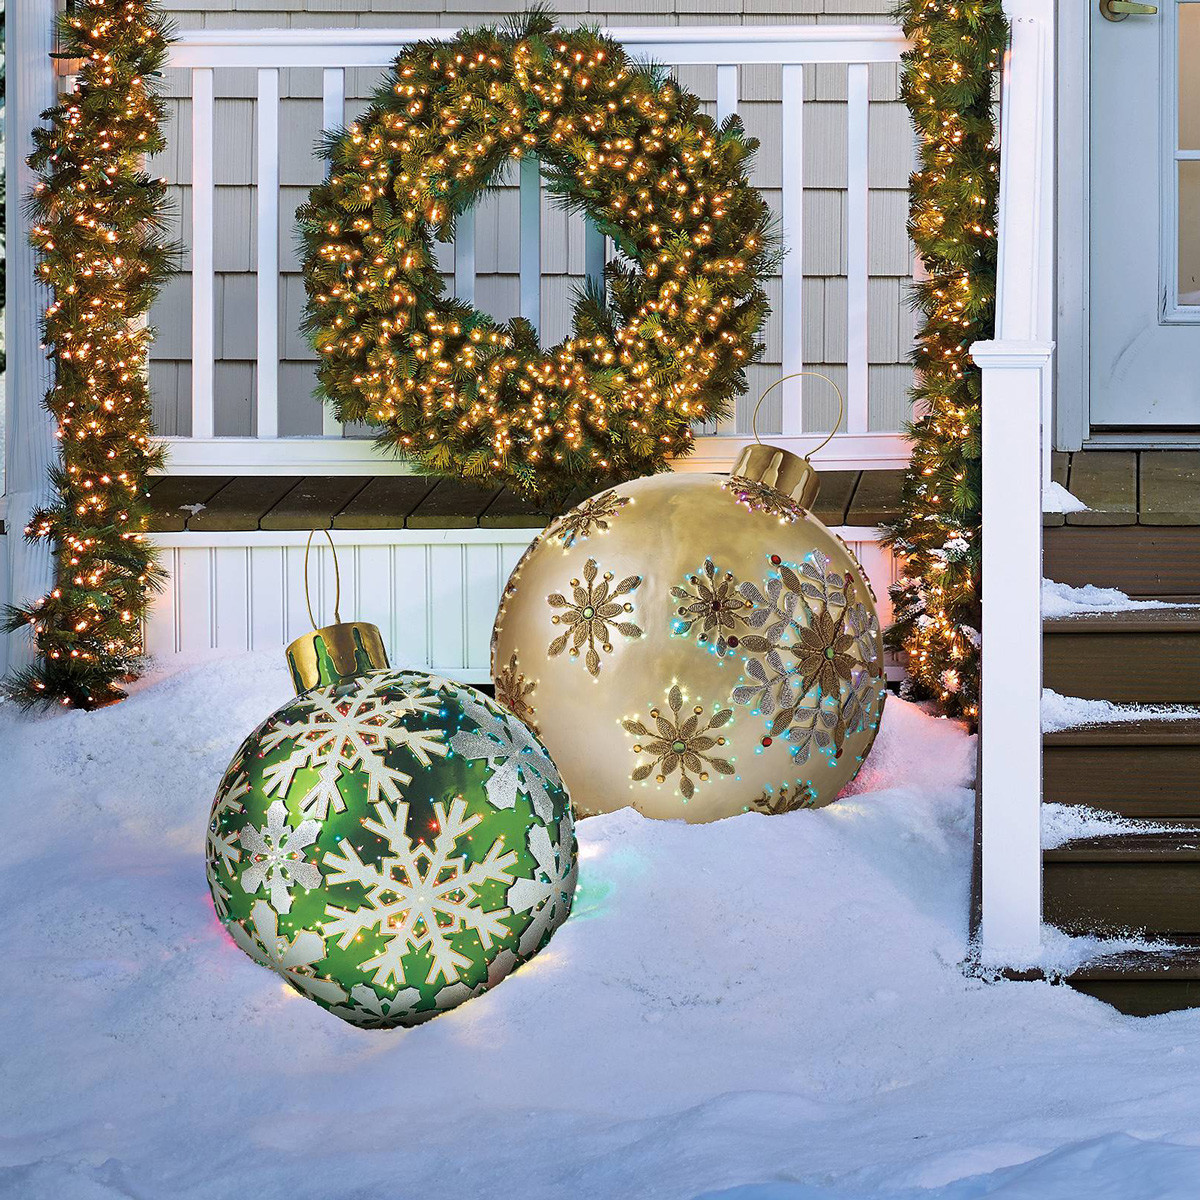 Christmas Decorations Outdoor
 Massive Fiber Optic LED Outdoor Christmas Ornaments The